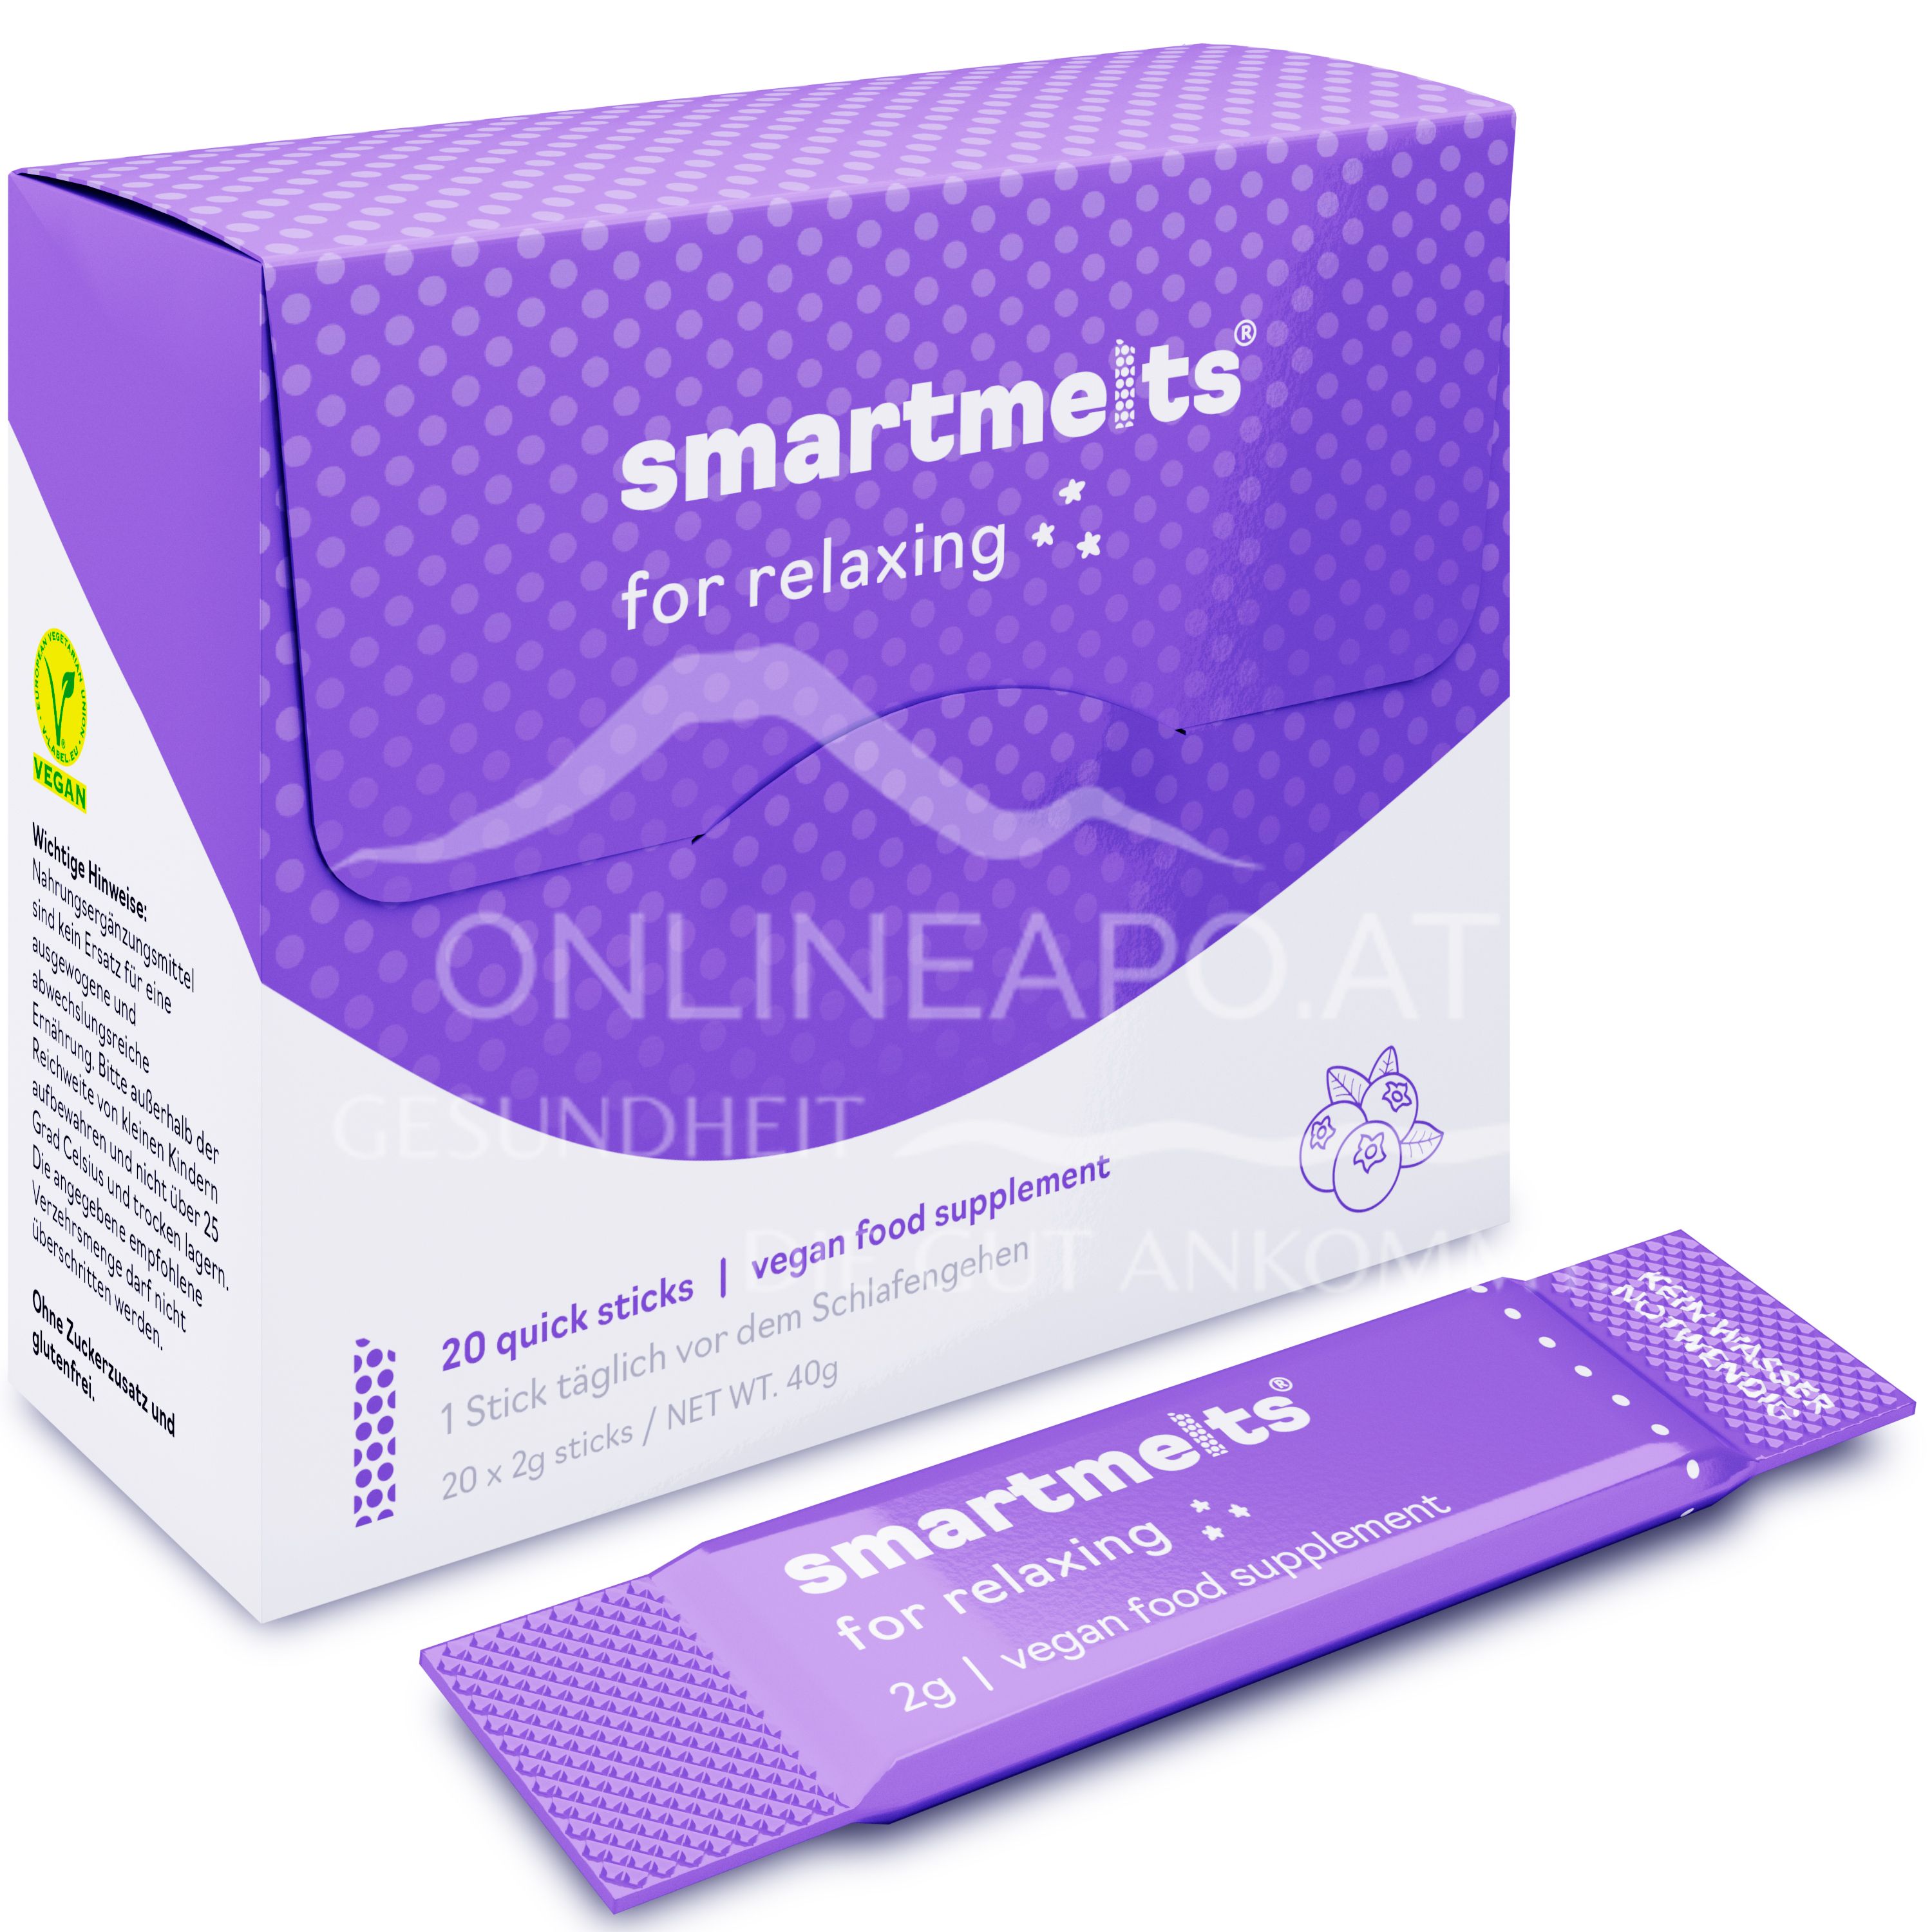 smartmelts for relaxing Sticks